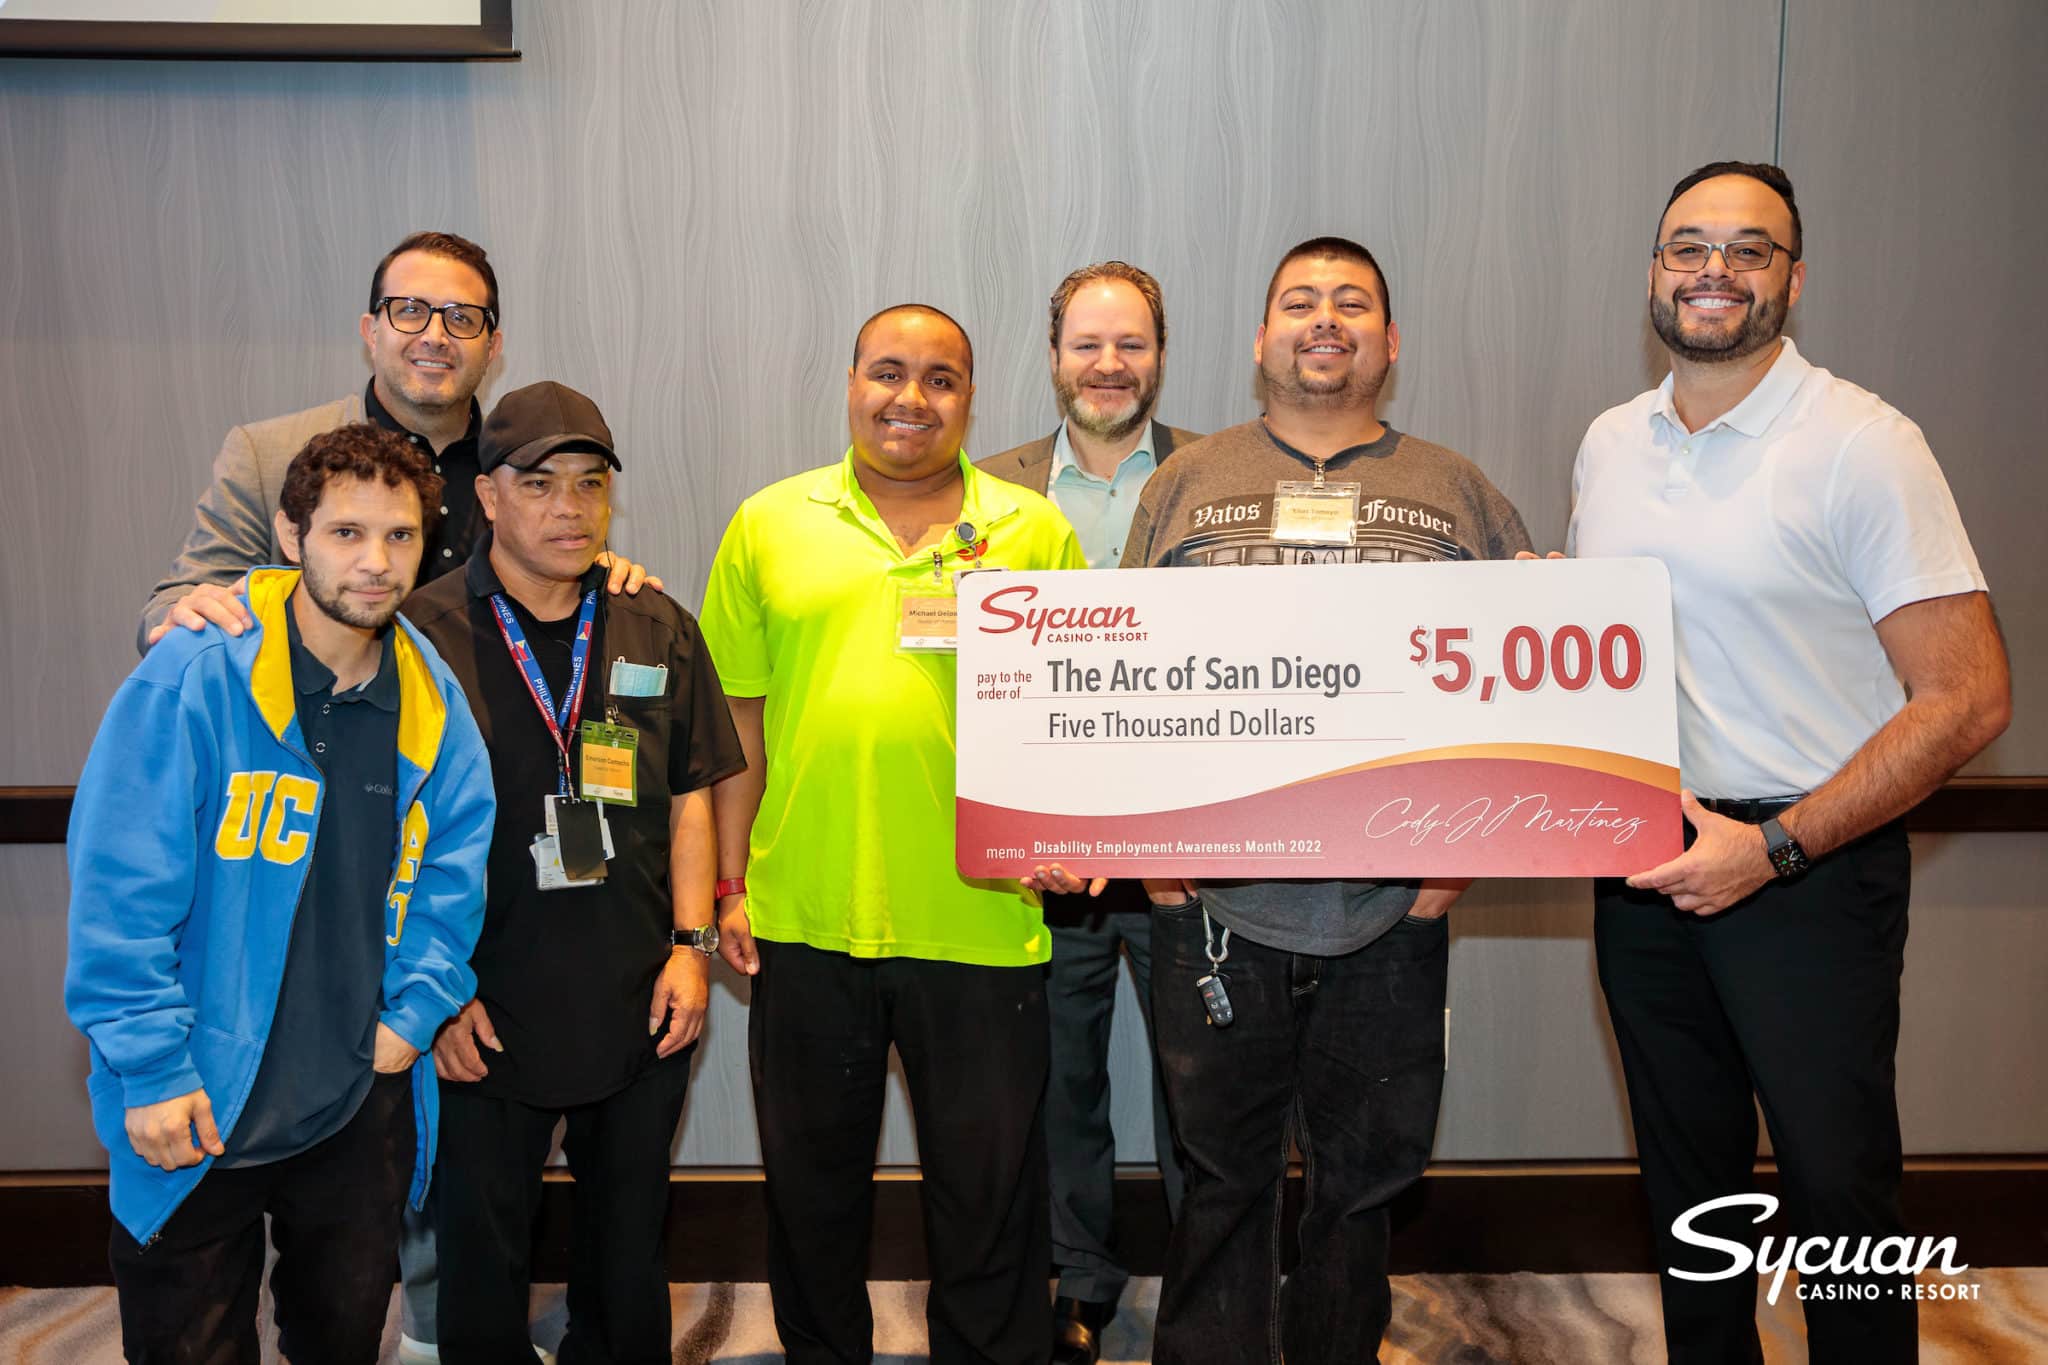 In addition to recognizing each team member and job coach, Sycuan presented The Arc of San Diego with a check for $5,000. (Chadd Cady / Sycuan Casino Resort)